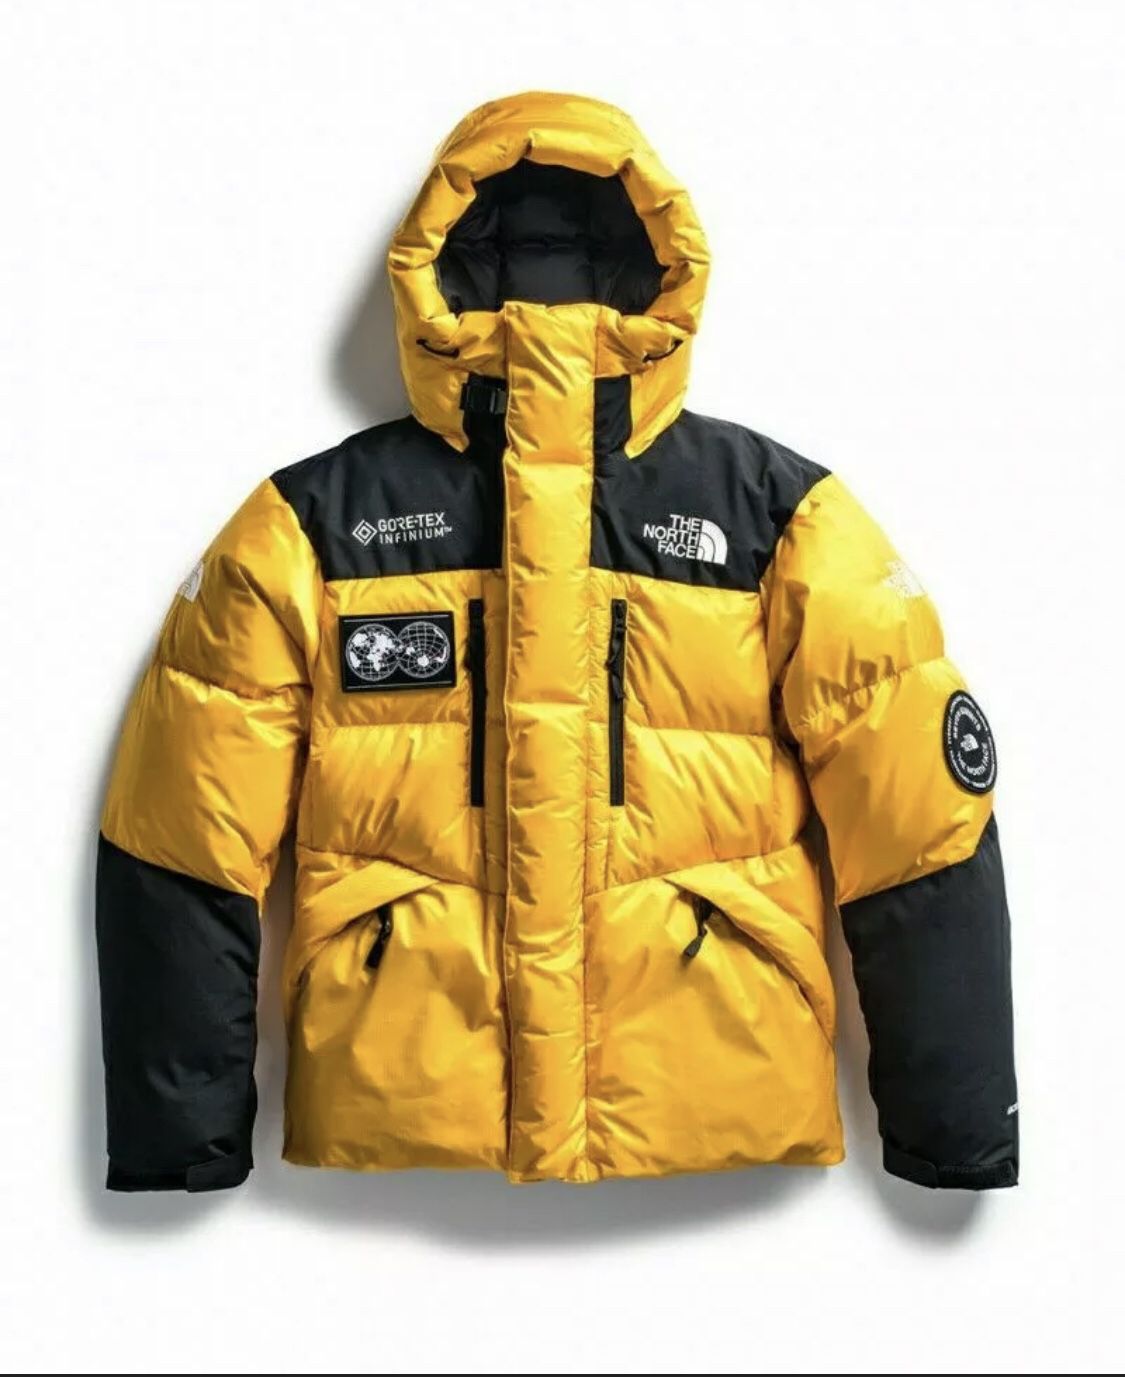 THE NORTH FACE 7SE SEVEN SUMMITS EDITION GORE-TEX HIMALAYAN PARKA SIZE ...